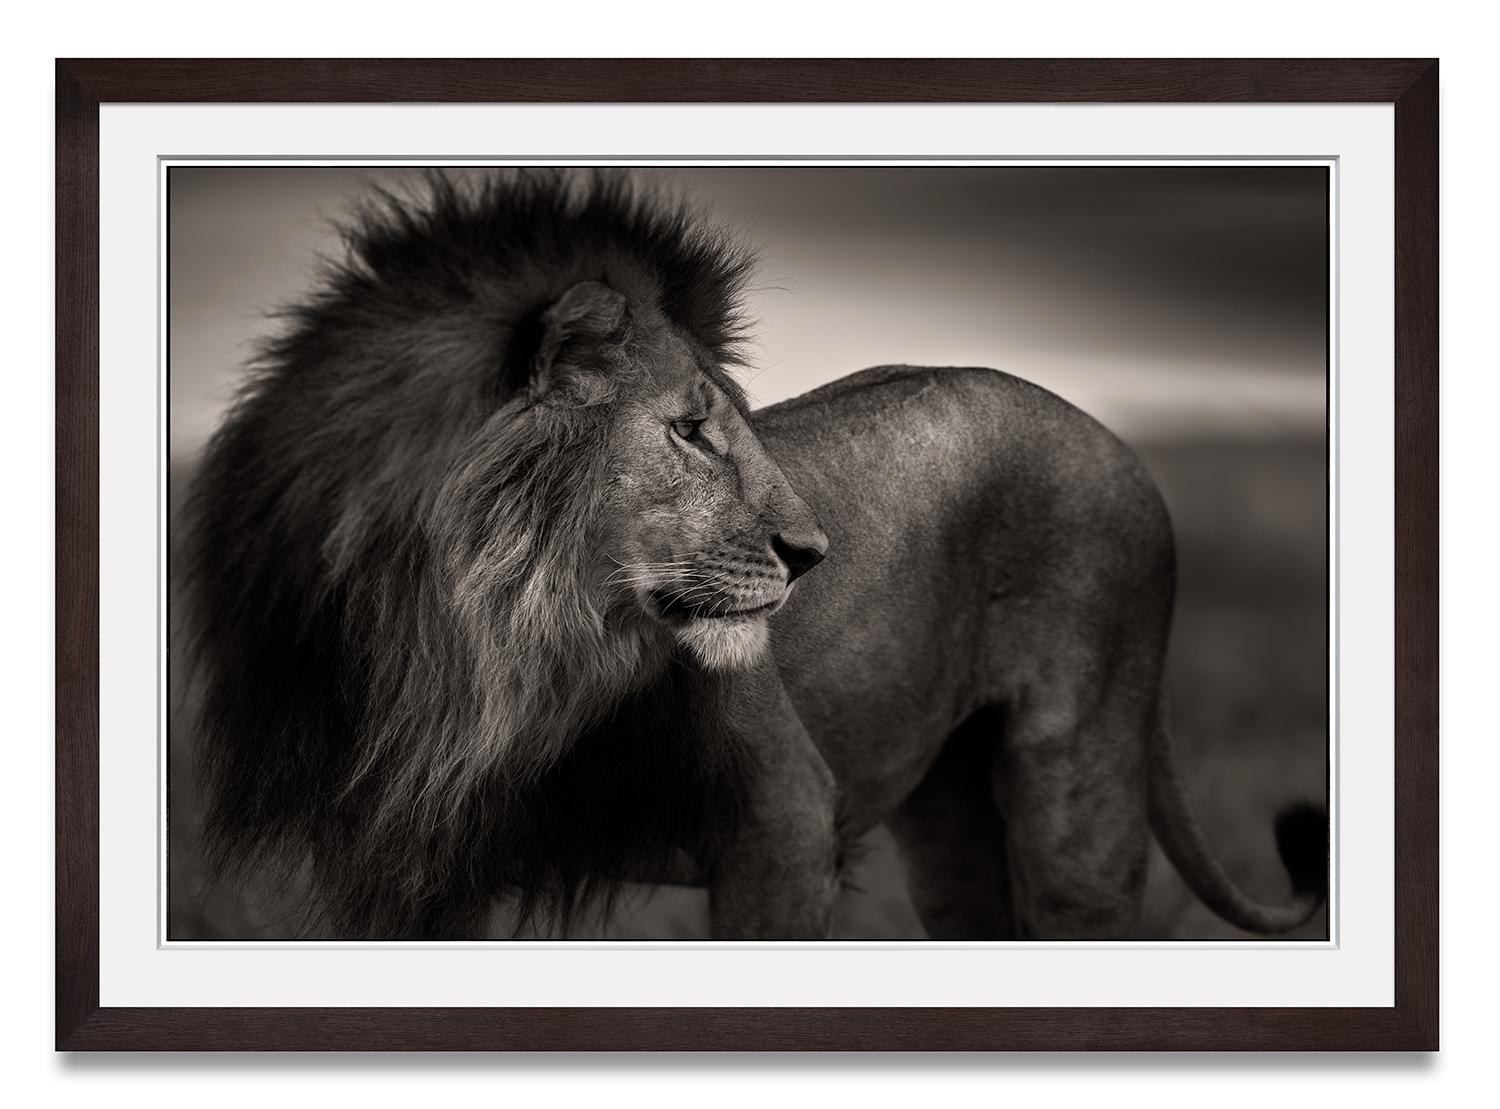 Lionheart, Lion, animal, wildlife, black and white photography, africa - Photograph by Joachim Schmeisser